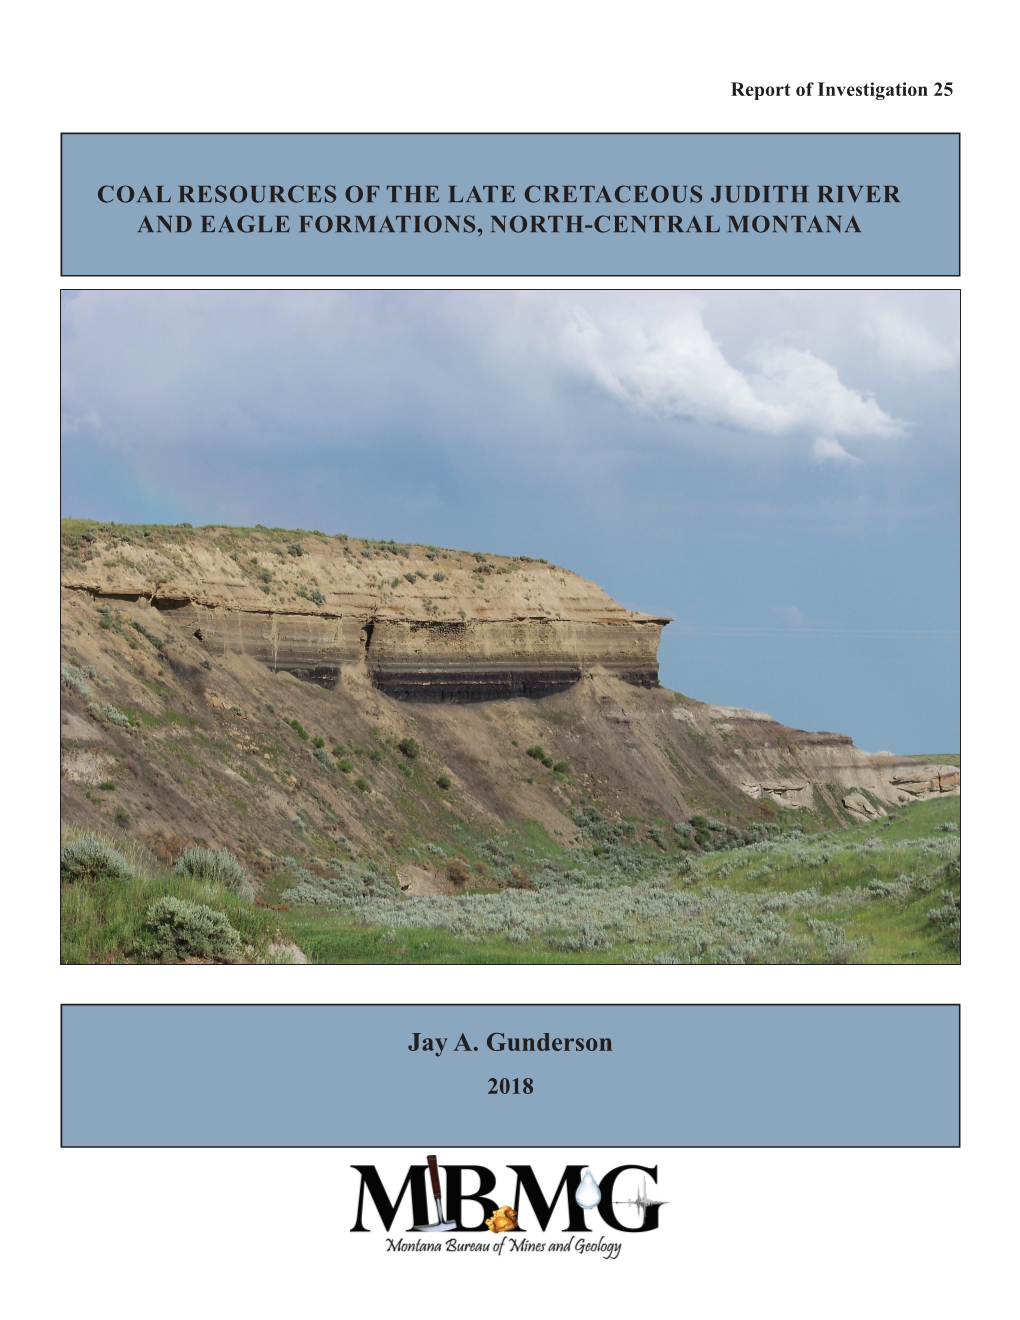 Jay A. Gunderson 2018 Cover Photo: Coalbed in the Upper Judith River Formation Partially Exposed North of Winifred, Montana (Photo Courtesy of Clay Schwartz, MBMG)